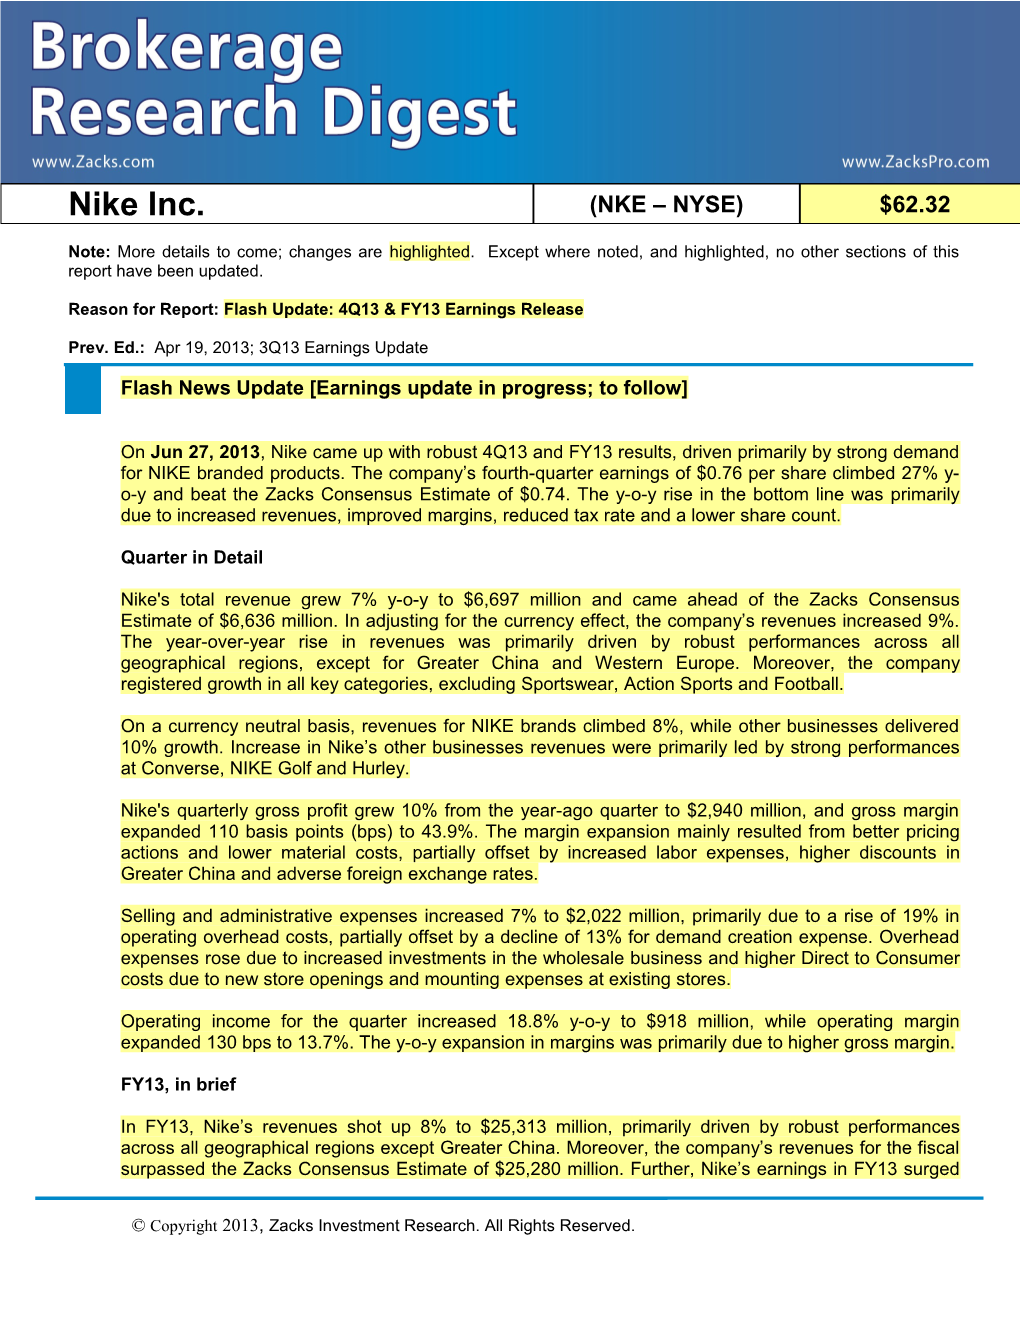 Reason for Report: Flash Update: 4Q13 & FY13 Earnings Release